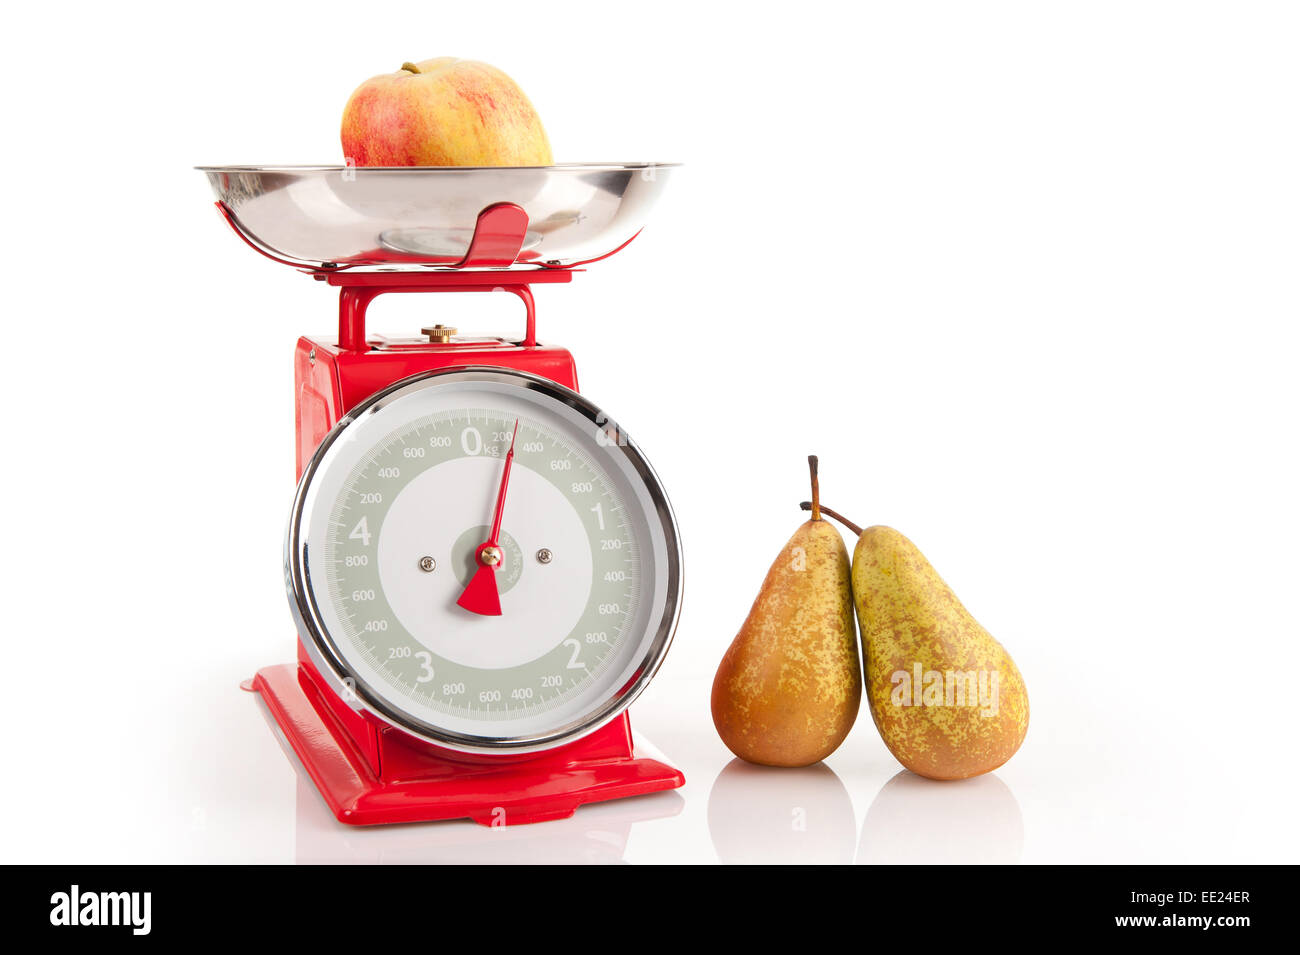 Kitchen red weight scale utensil Stock Photo